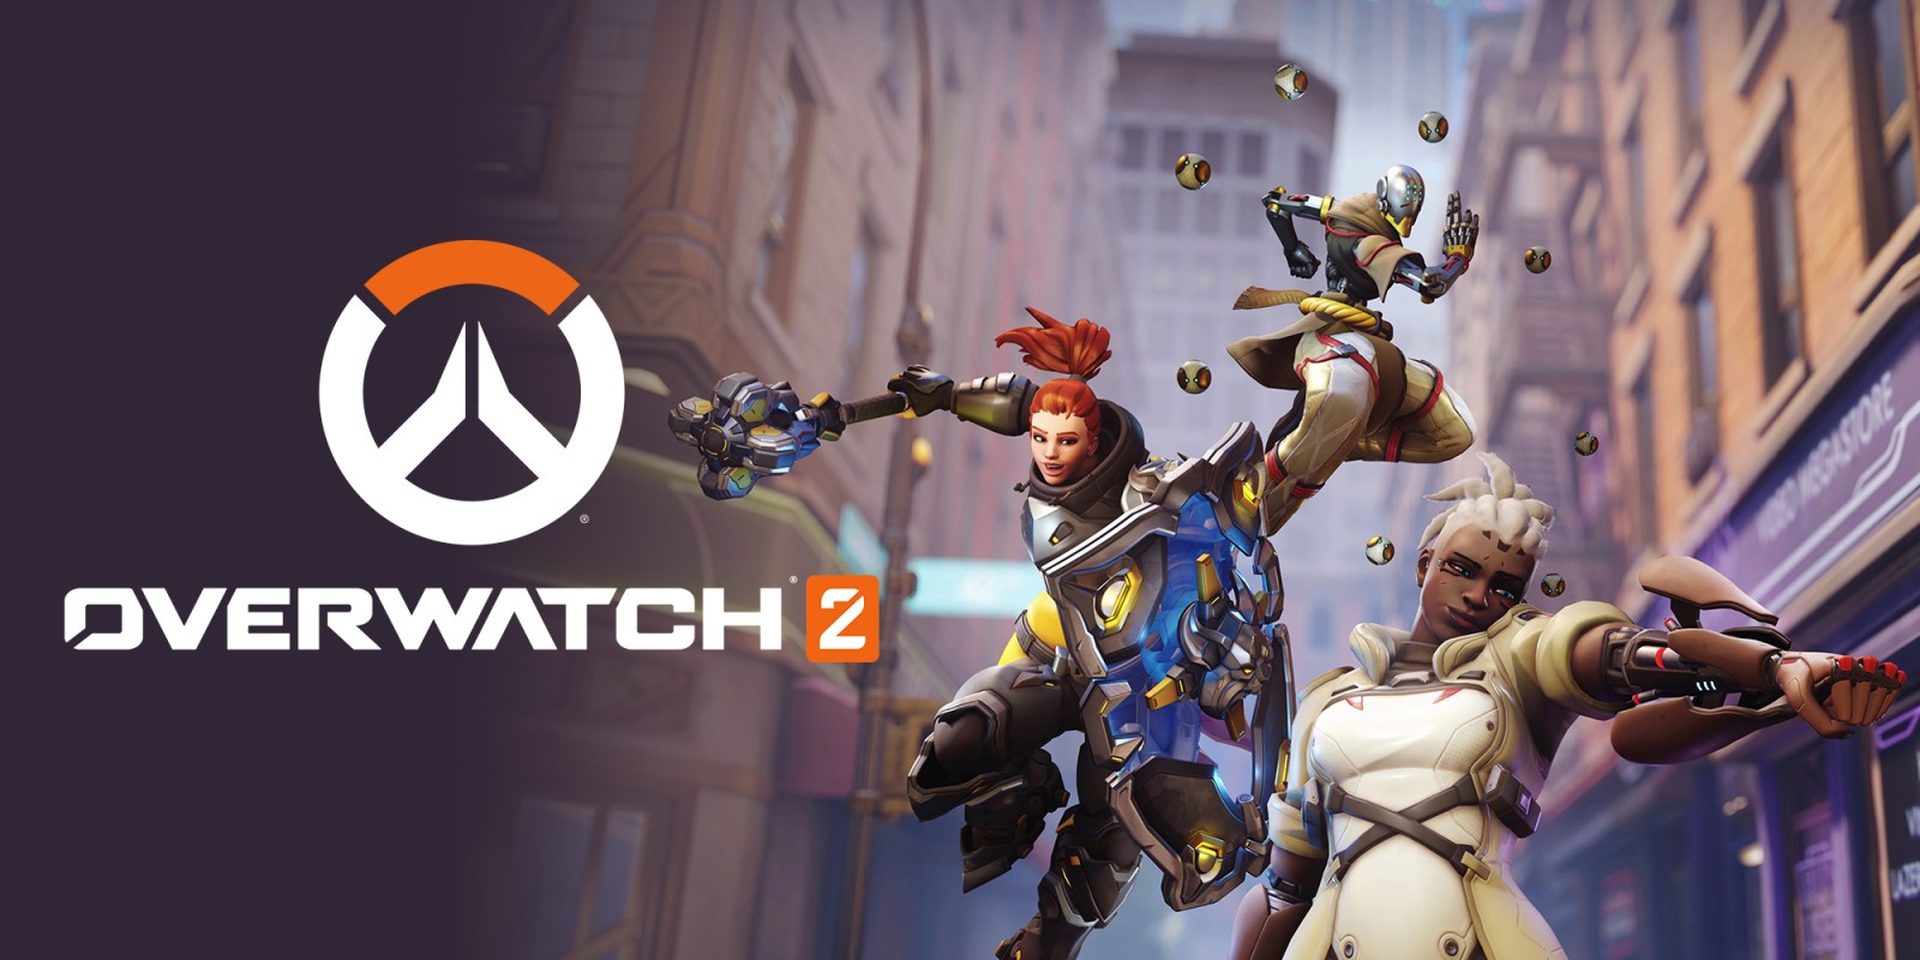 Can you play Overwatch 2 on Mac? How to play OW2 on Mac?